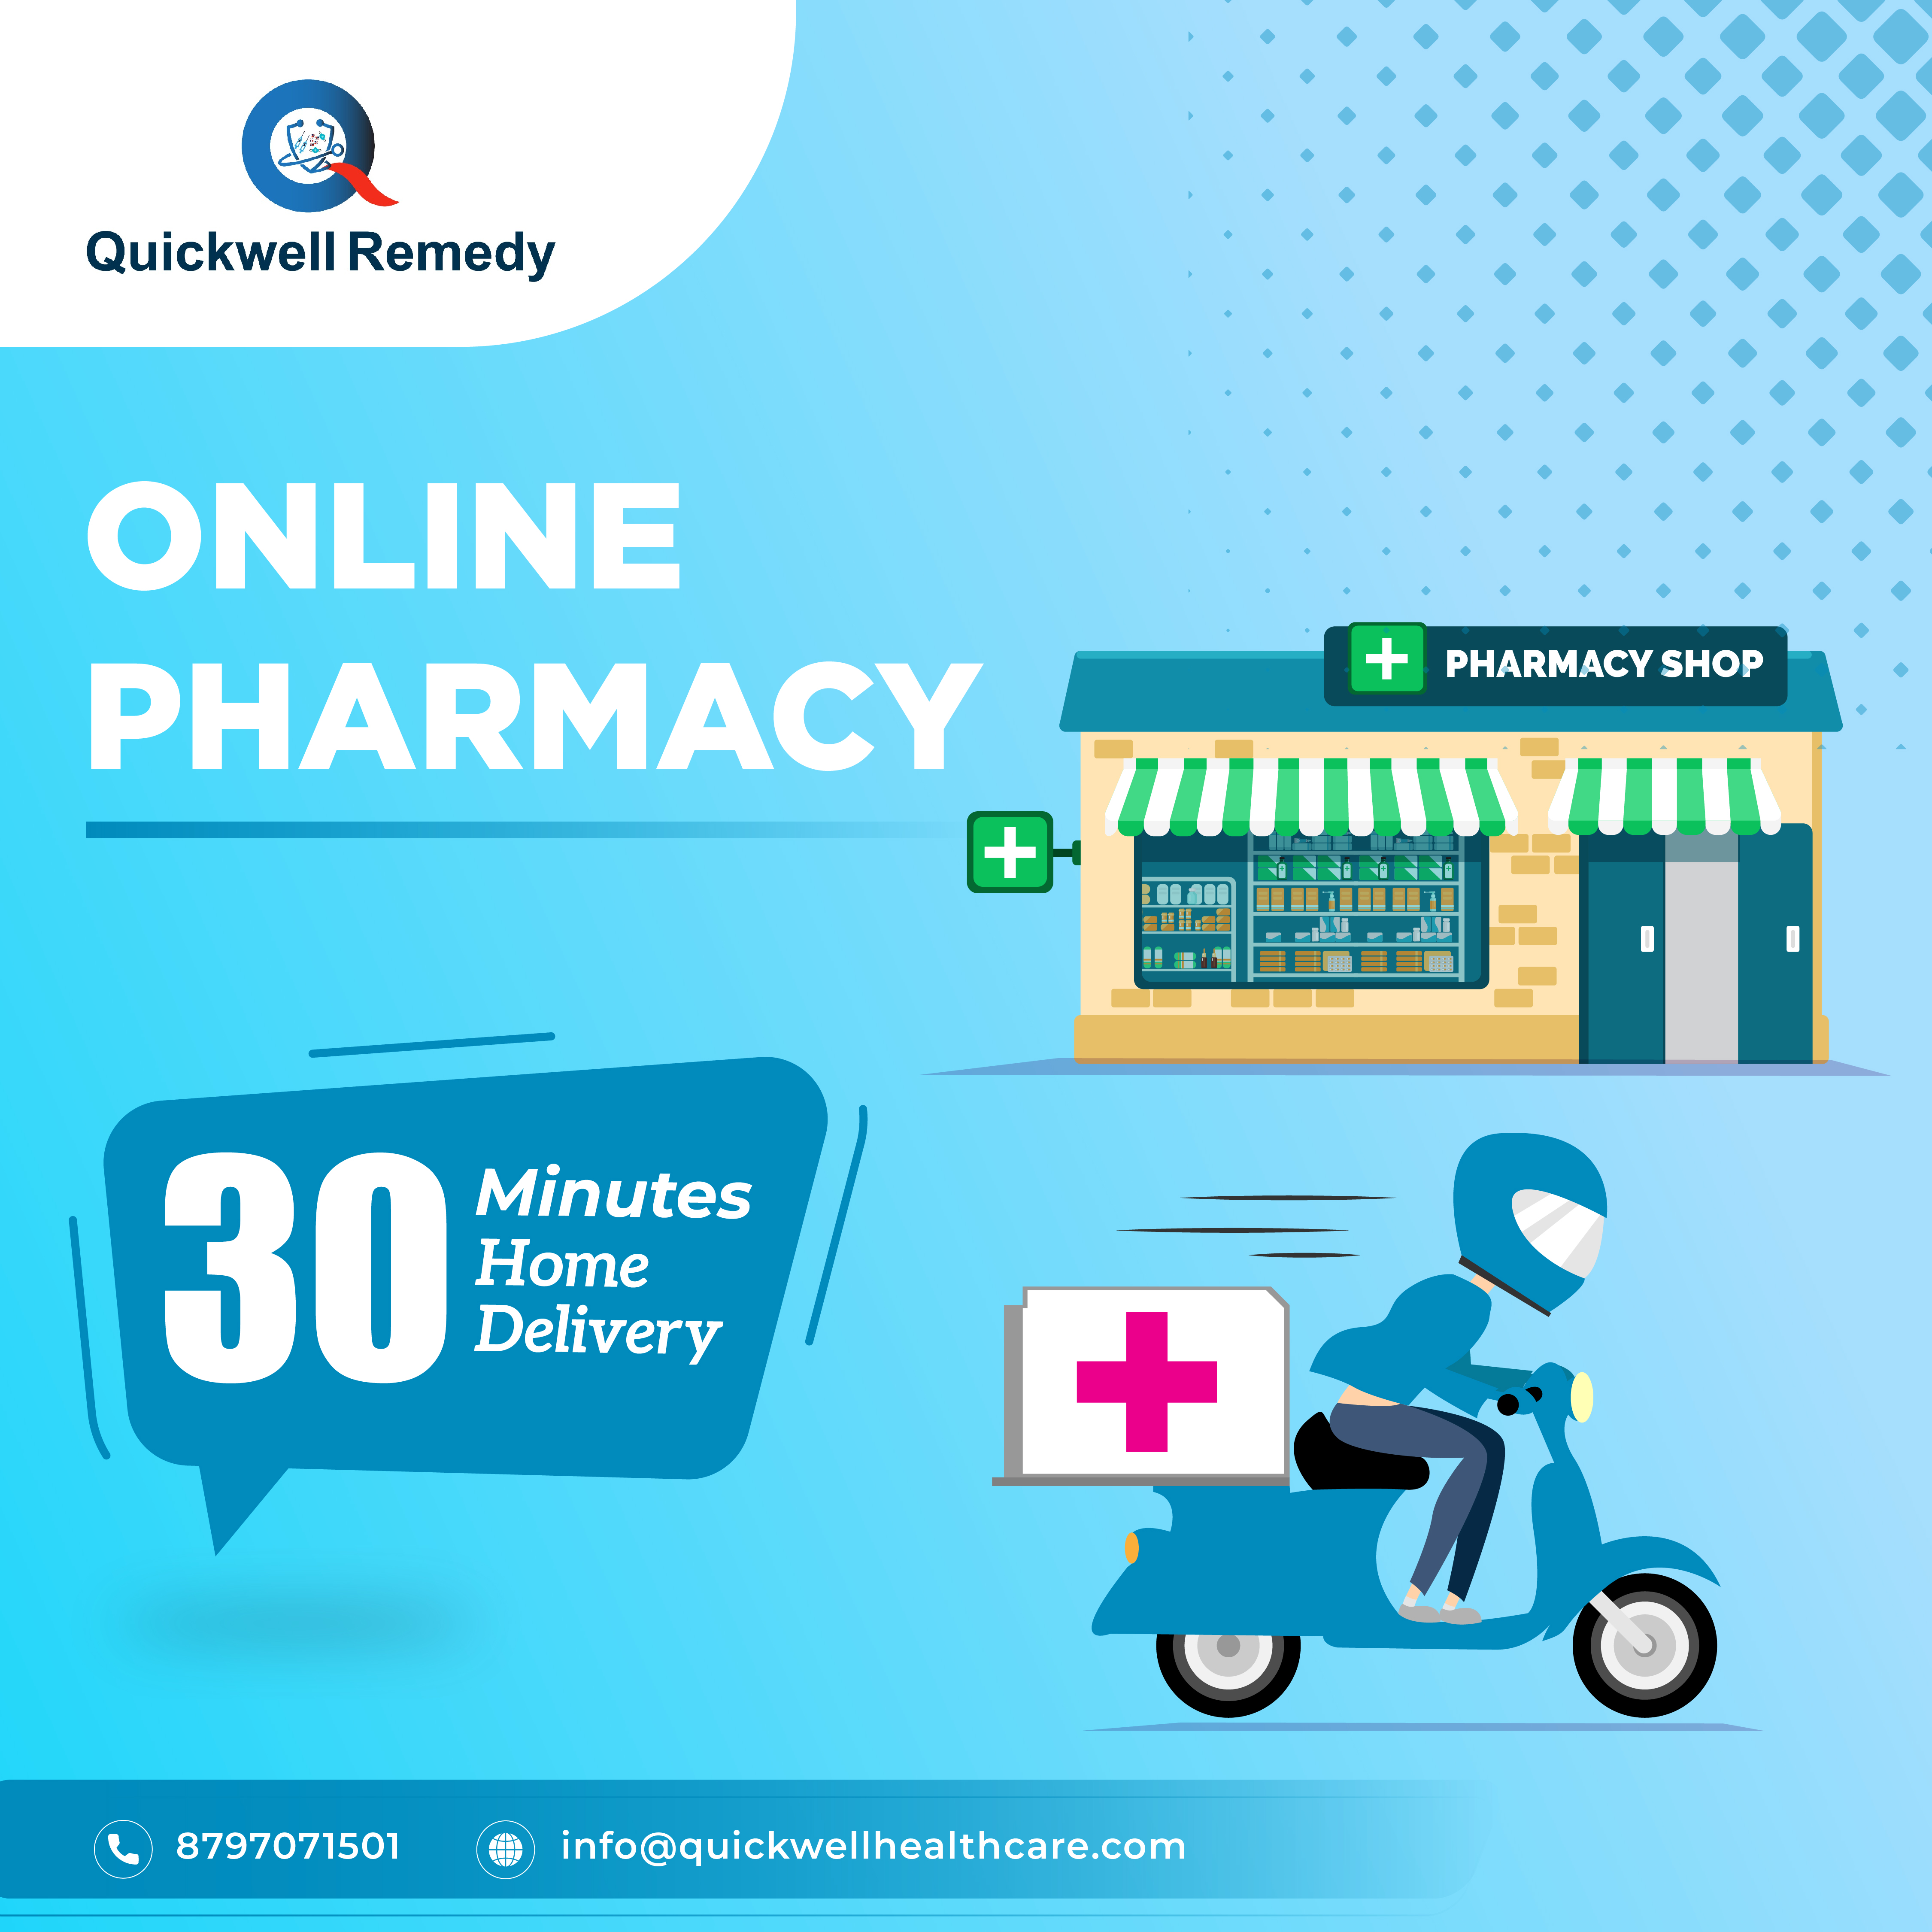 Online Pharmacy at your home within 30 minutes